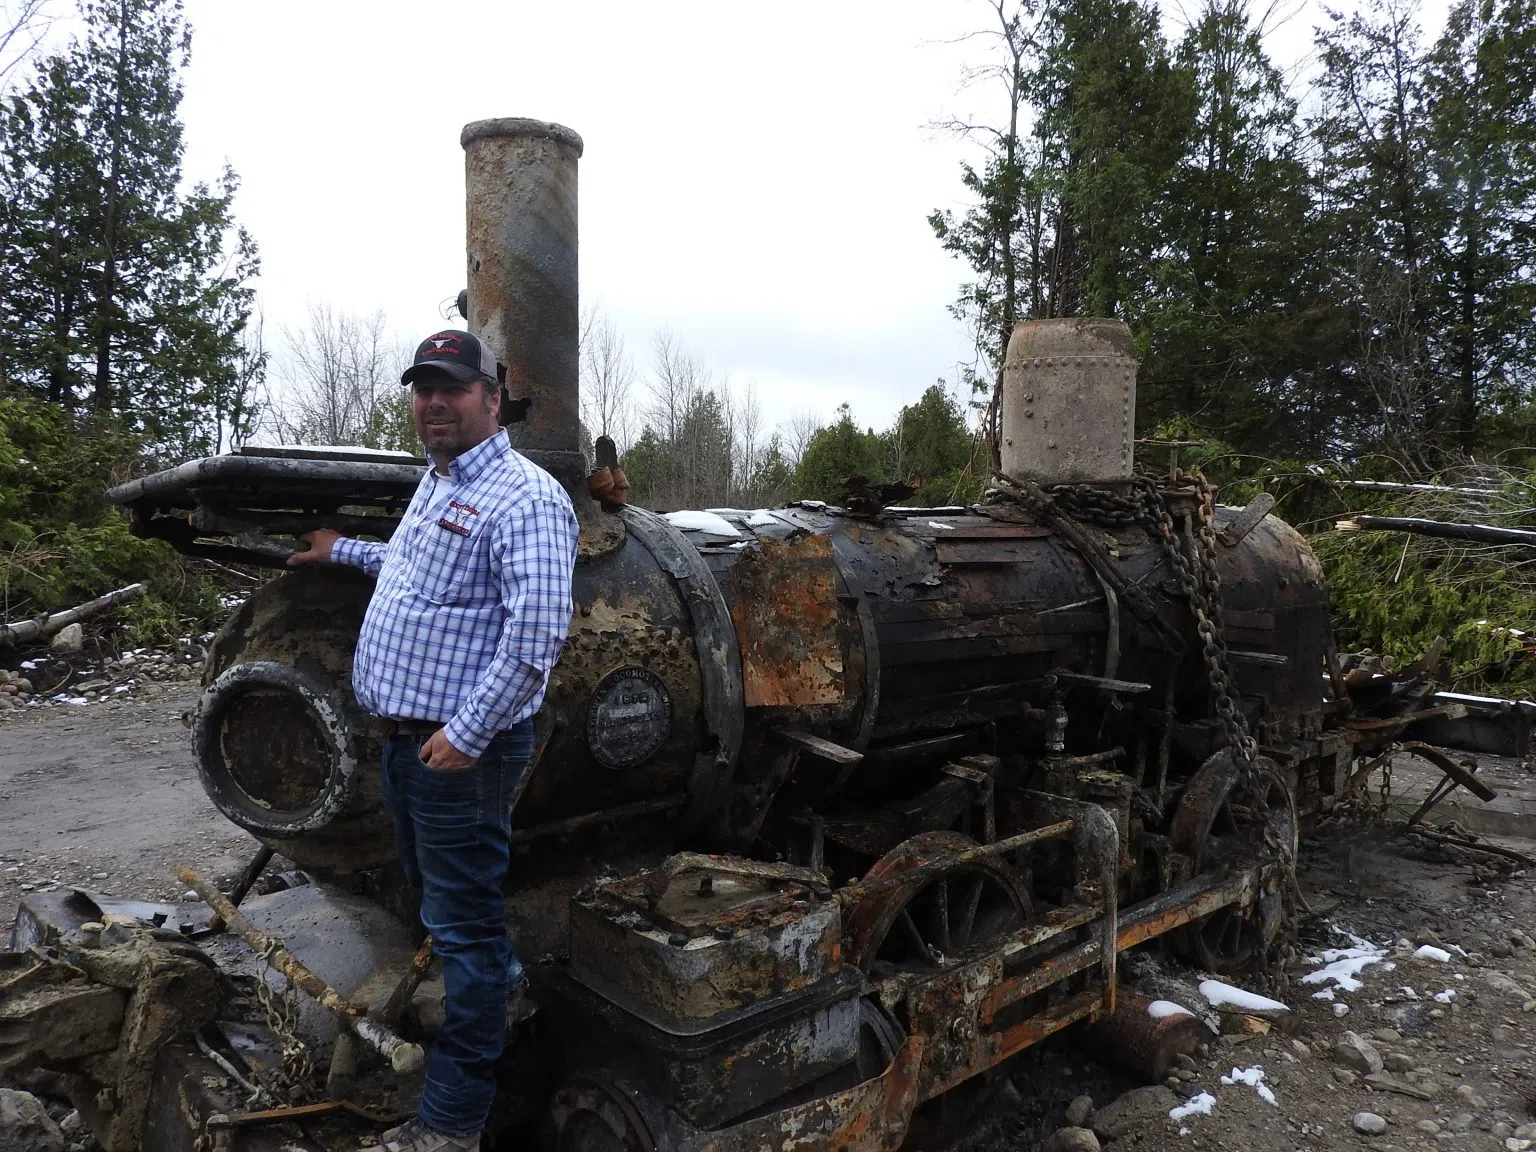 150 Year-Old Train Engine: Historical Find In Marlbank!